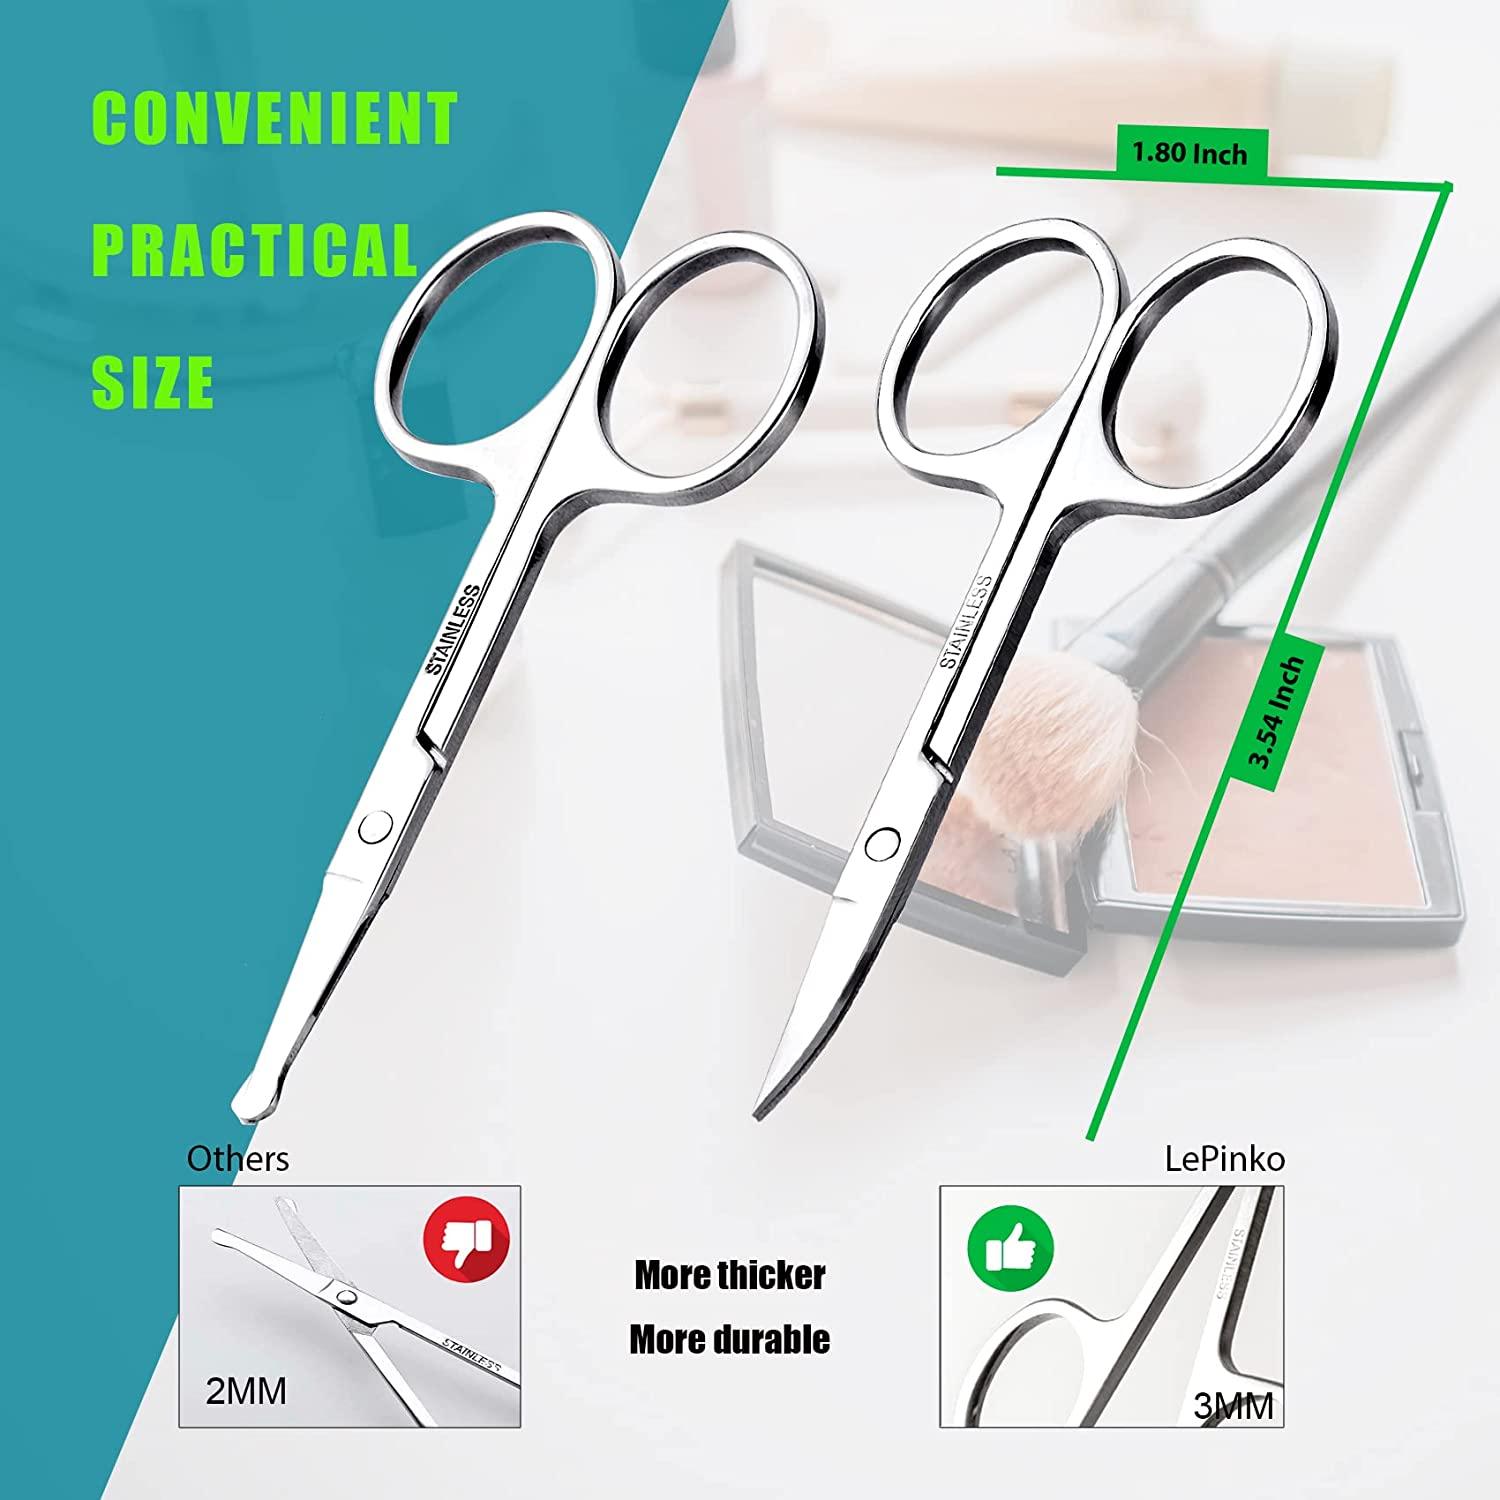 Facial Hair Small Grooming Scissors For Men Women - Eyebrow, Nose Hair,  Mustache, Beard, Eyelashes, Ear Trimming Kit - Curved and Rounded Safety  Tip Clippers For Hair Cutting - Stainless Steel 2PCS